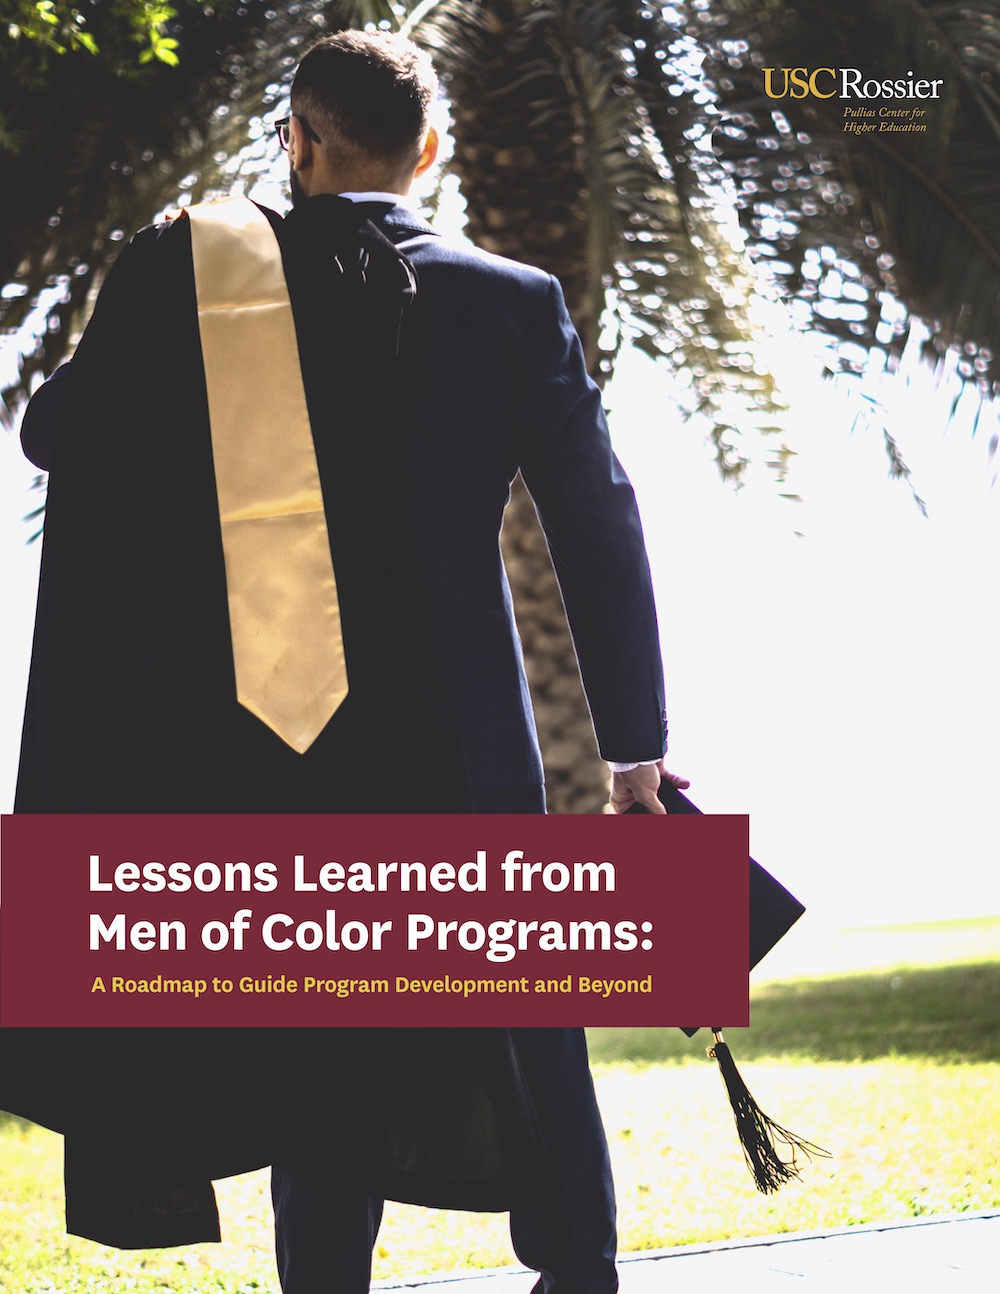 Lessons Learned from Men of Color Programs: A Roadmap to Guide Program Development and Beyond